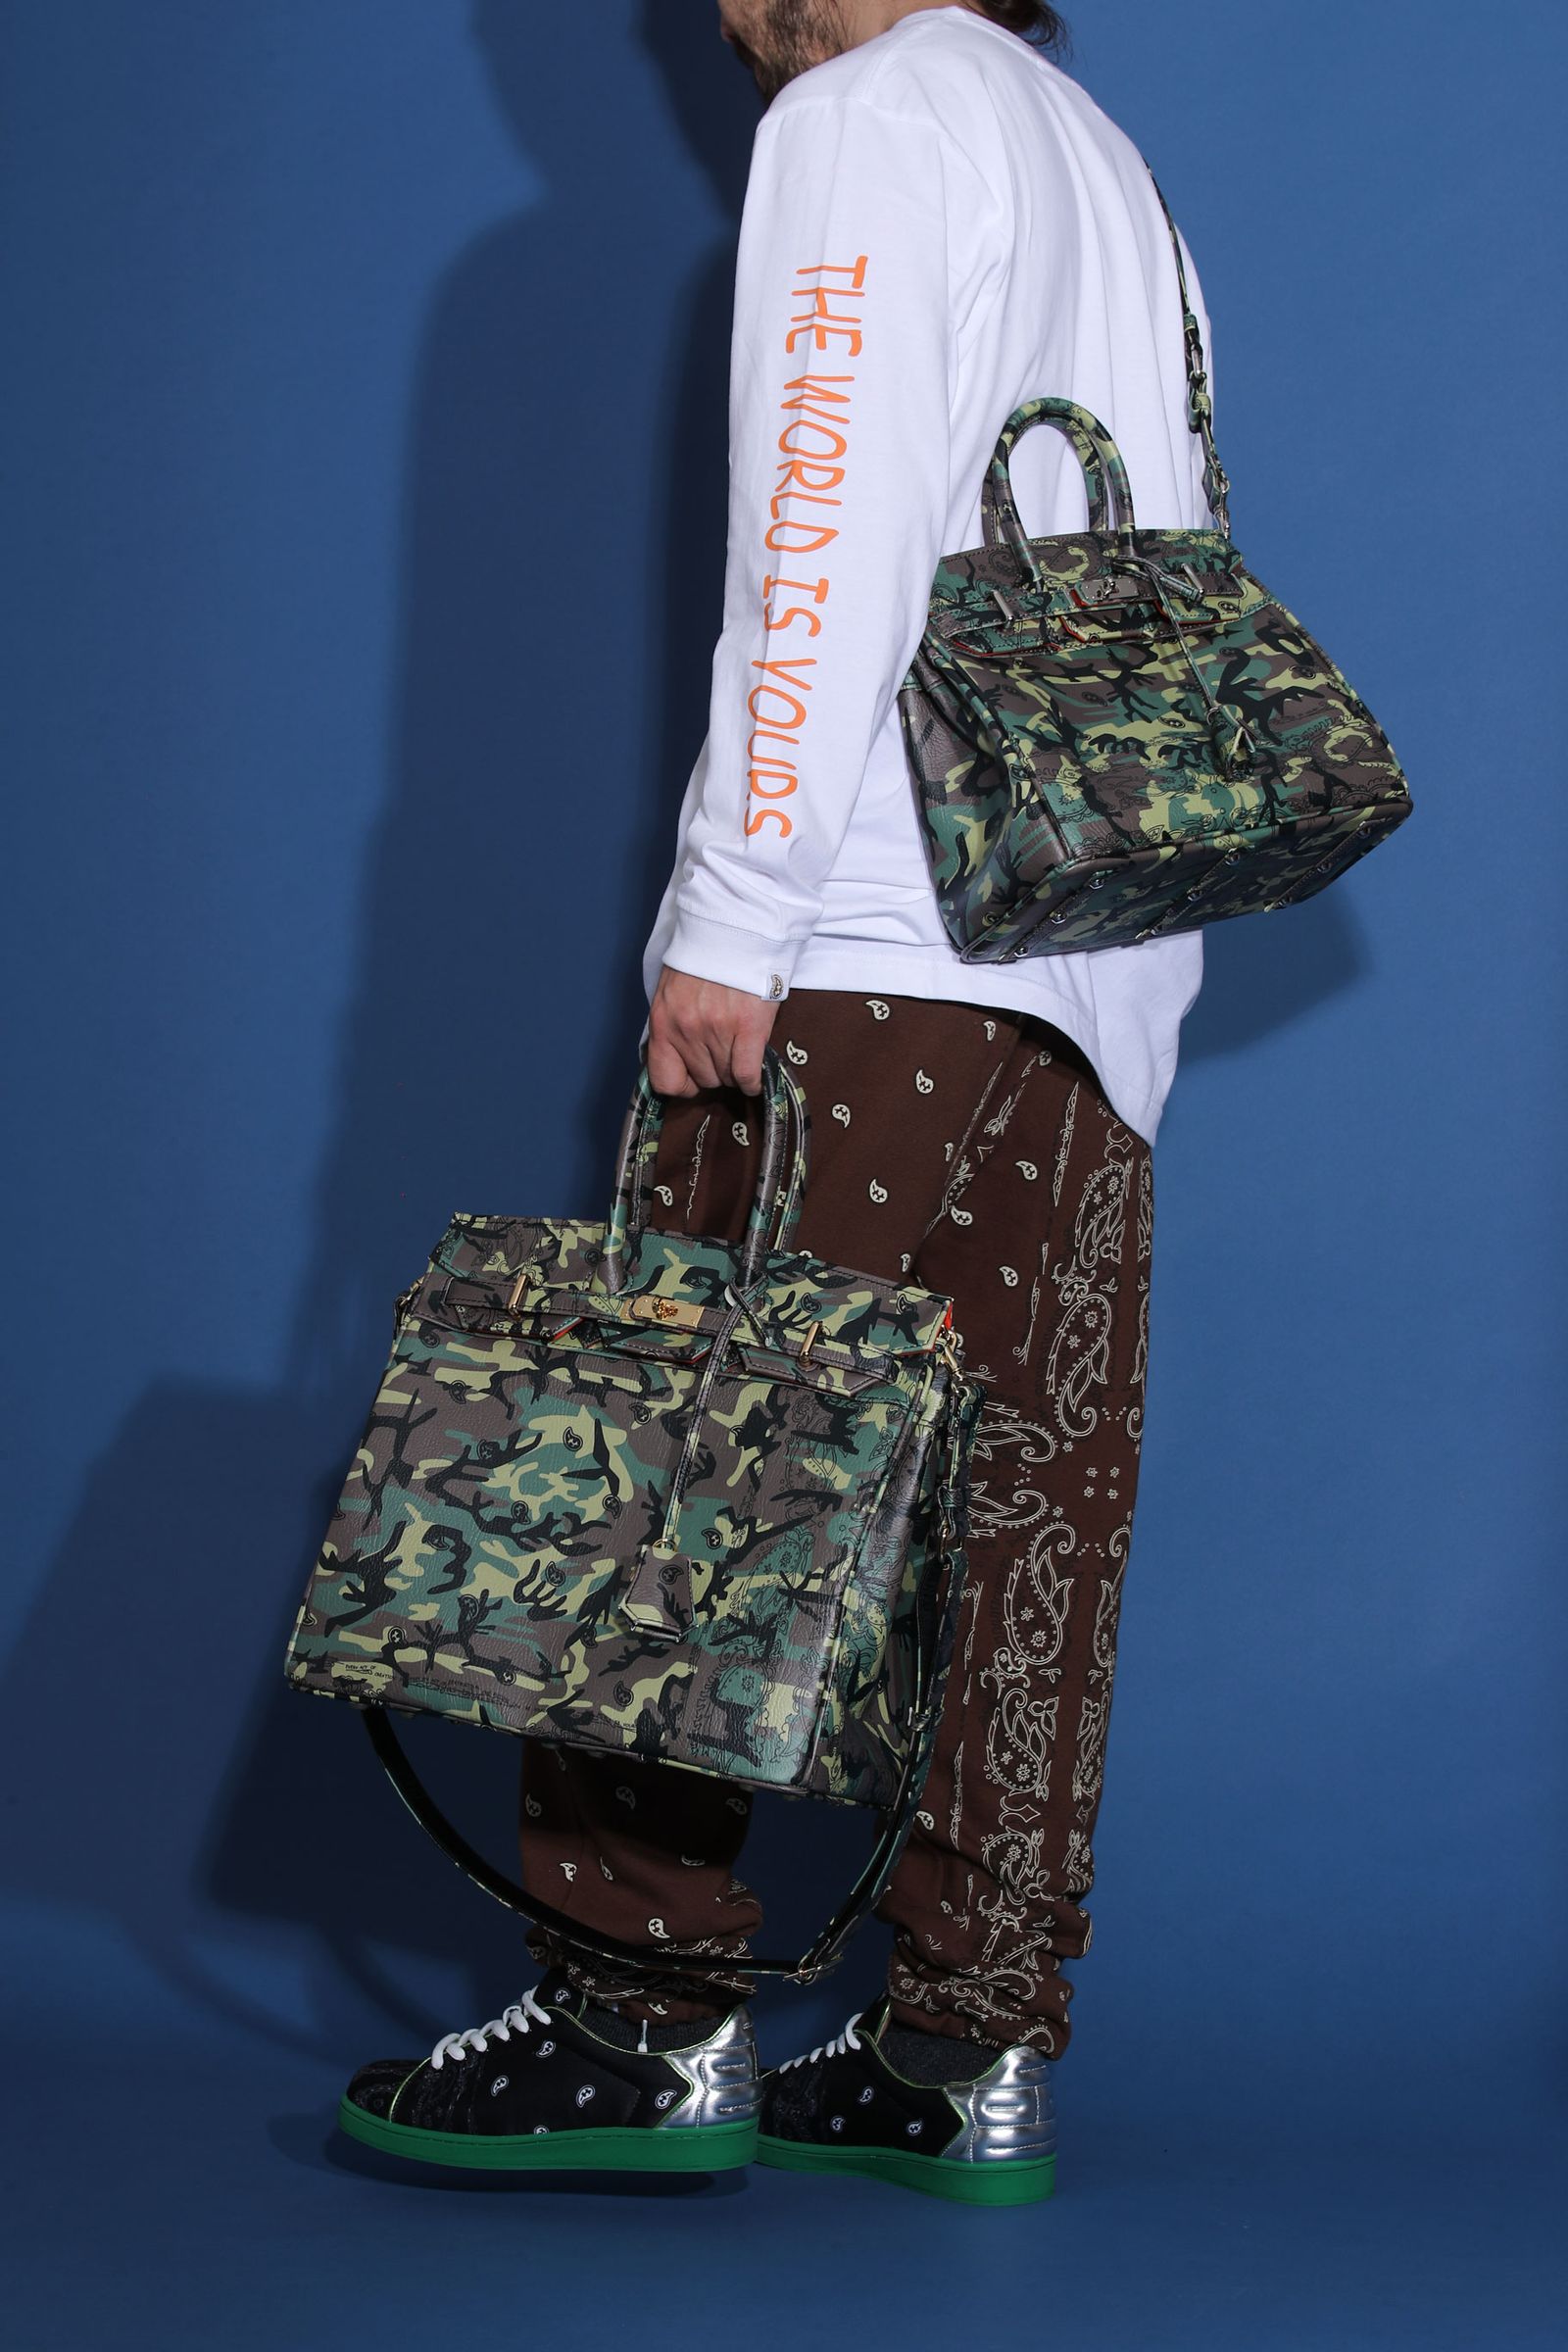 THE WORLD IS YOURS PAISLEY BAG バッグボストンバッグ - ボストンバッグ